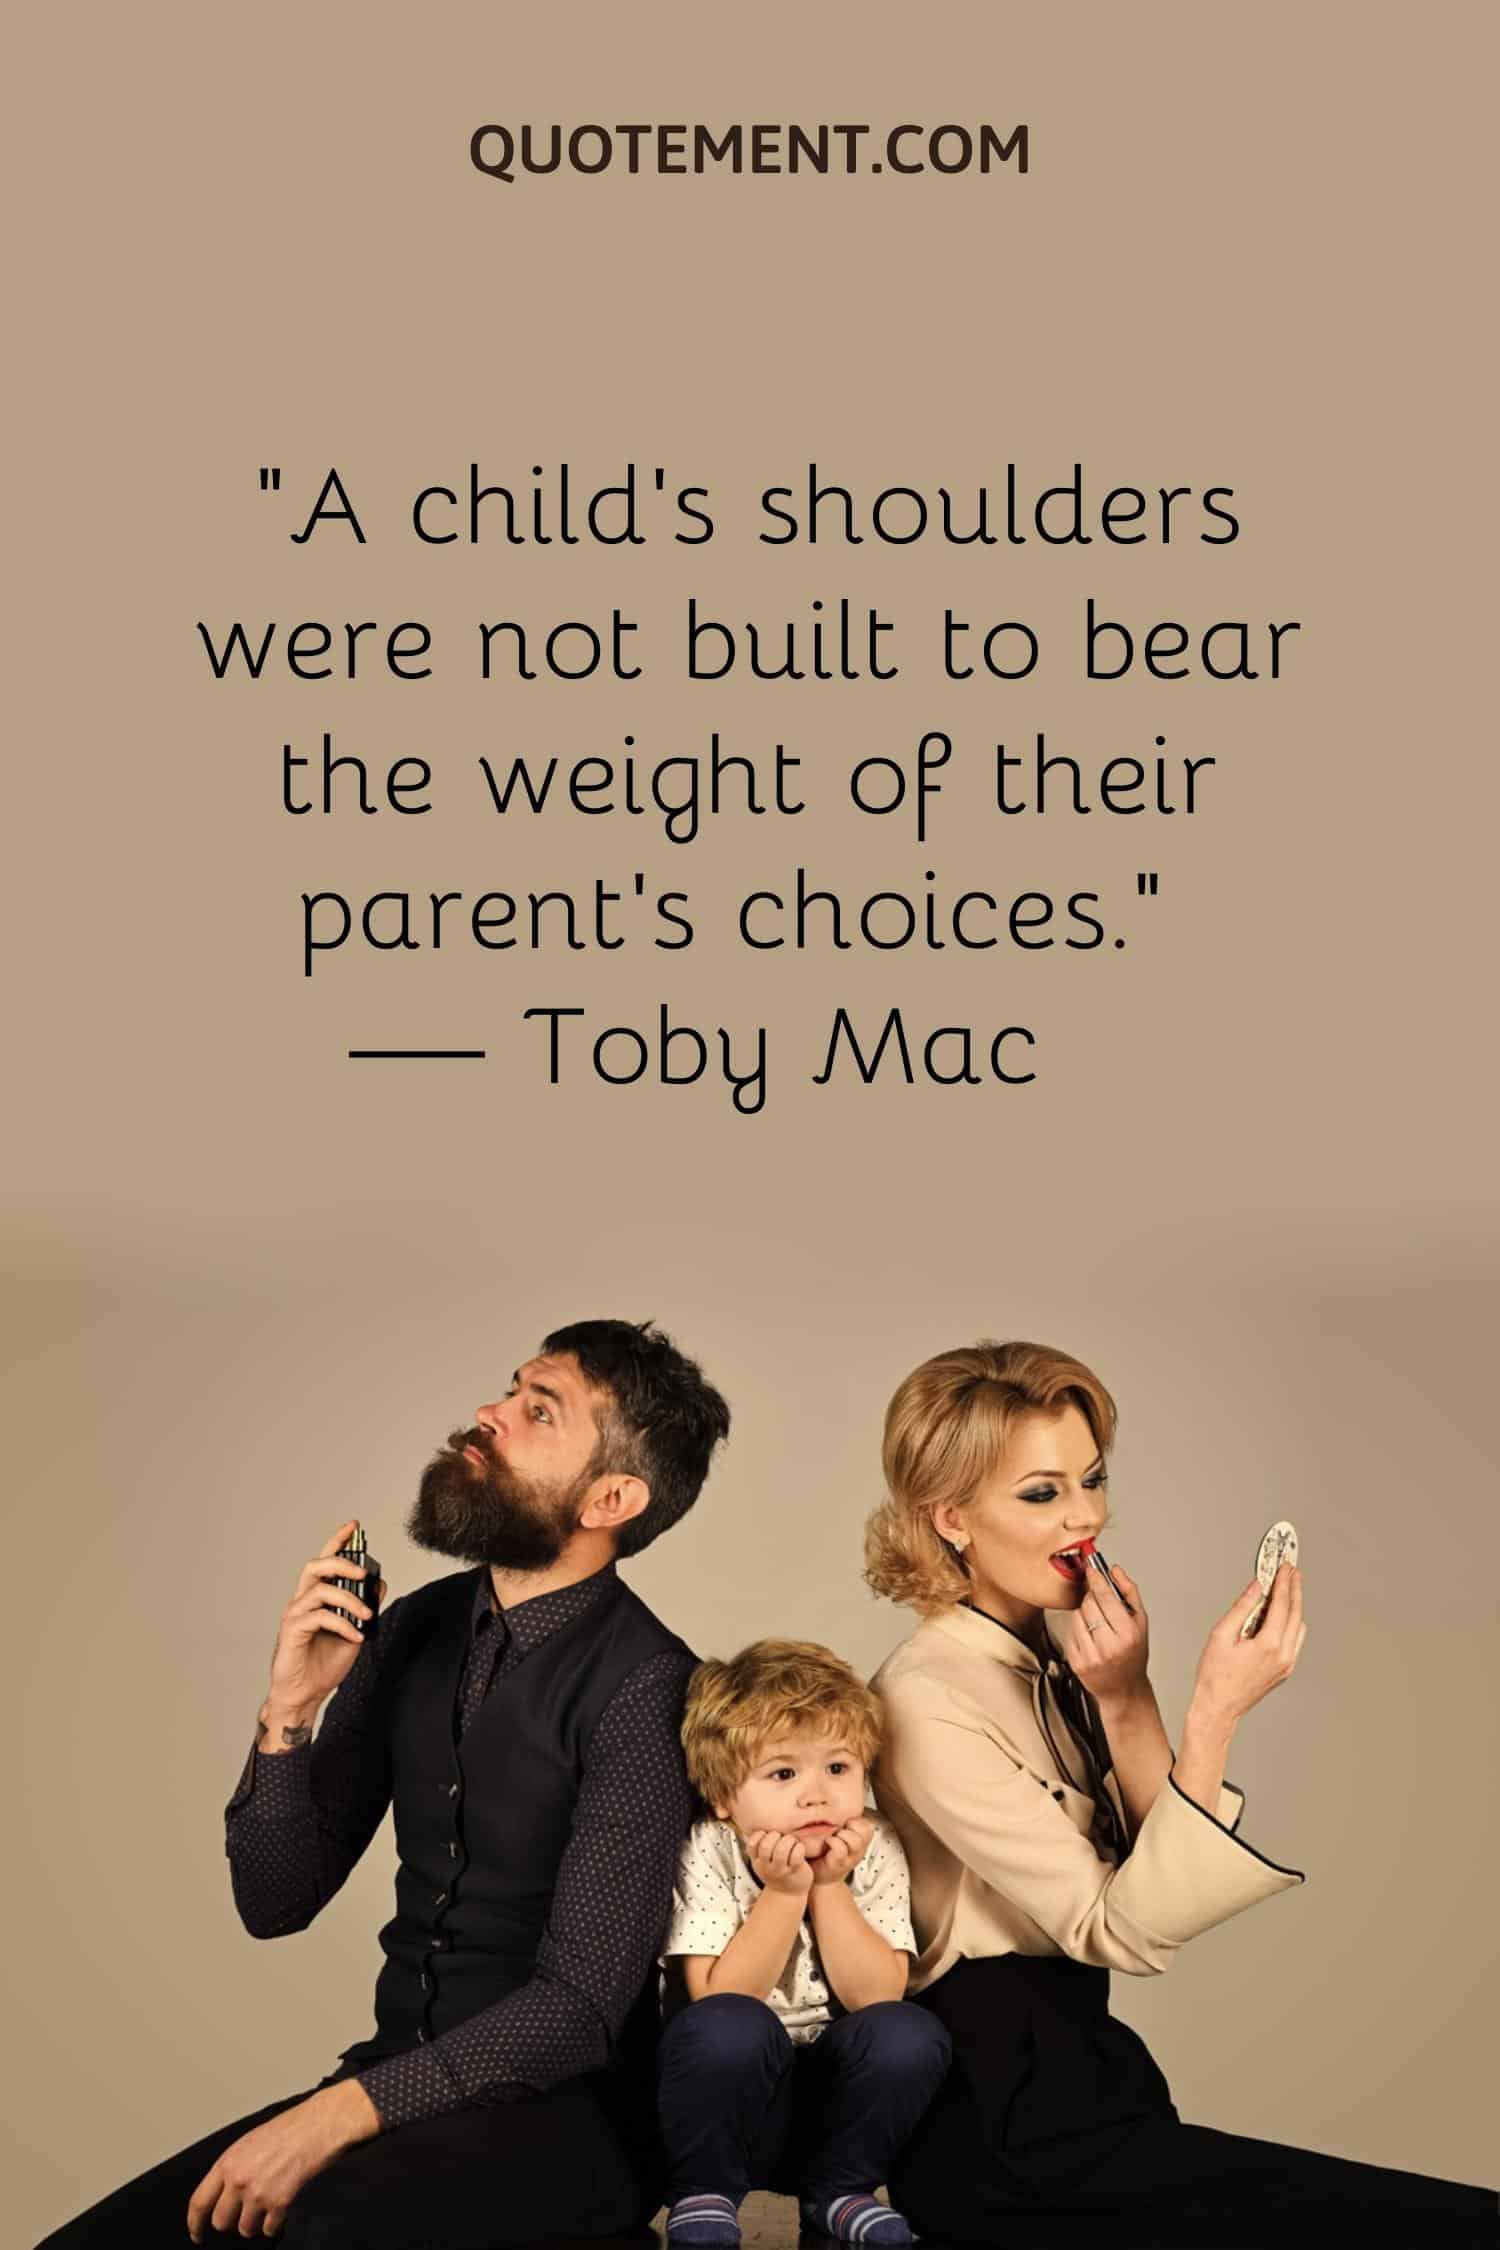 A child’s shoulders were not built to bear the weight of their parent’s choices